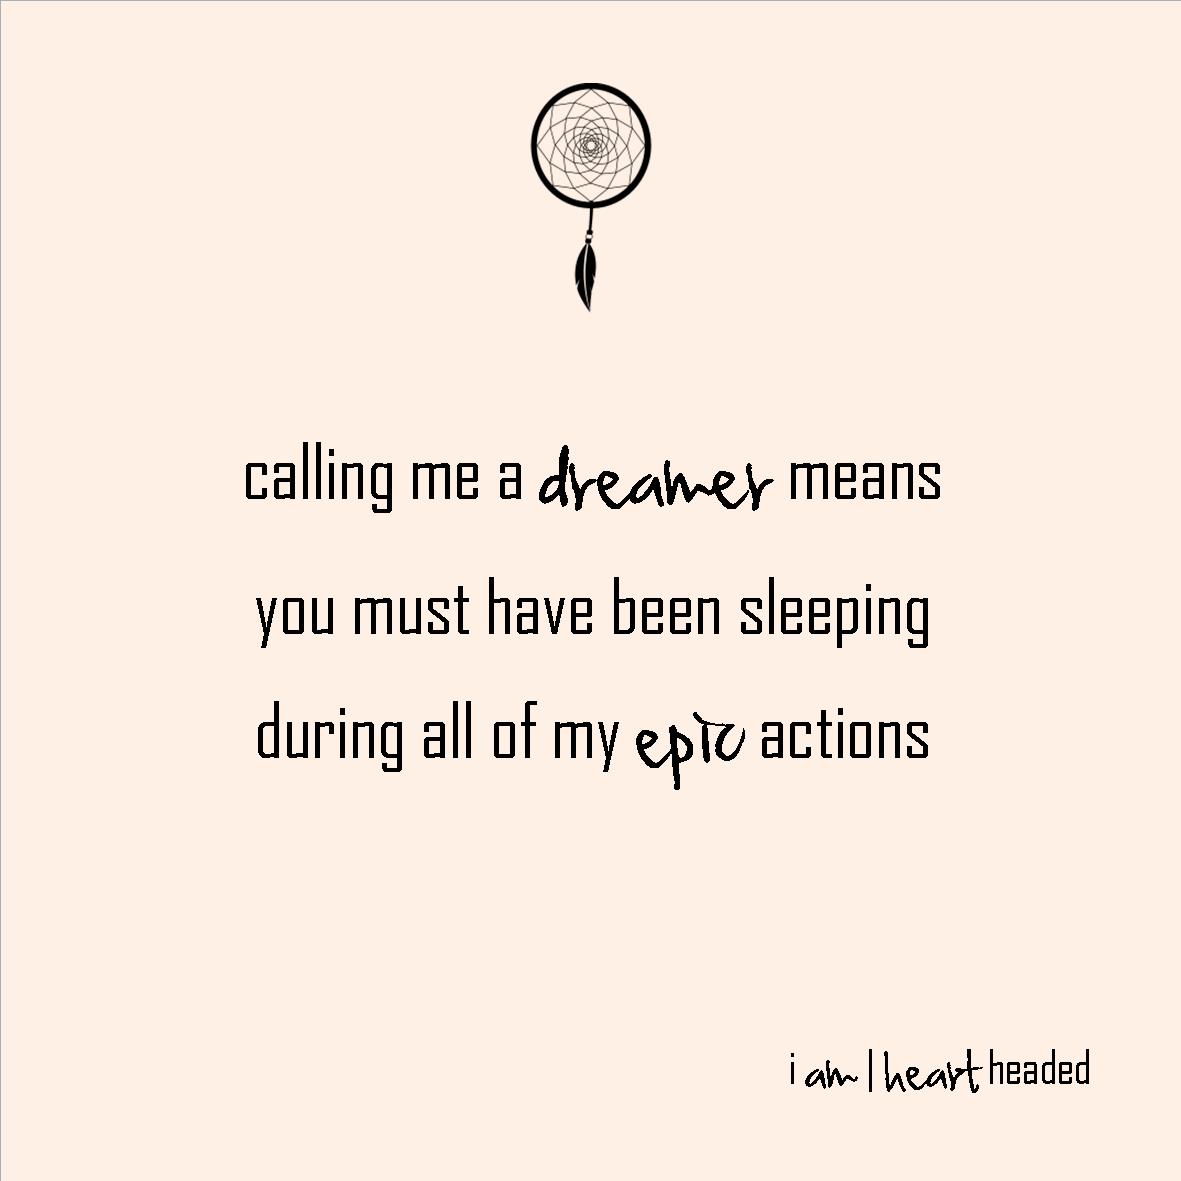 full-size featured image of quote 'my epic actions' in category 'wacky' at i am | heart headed